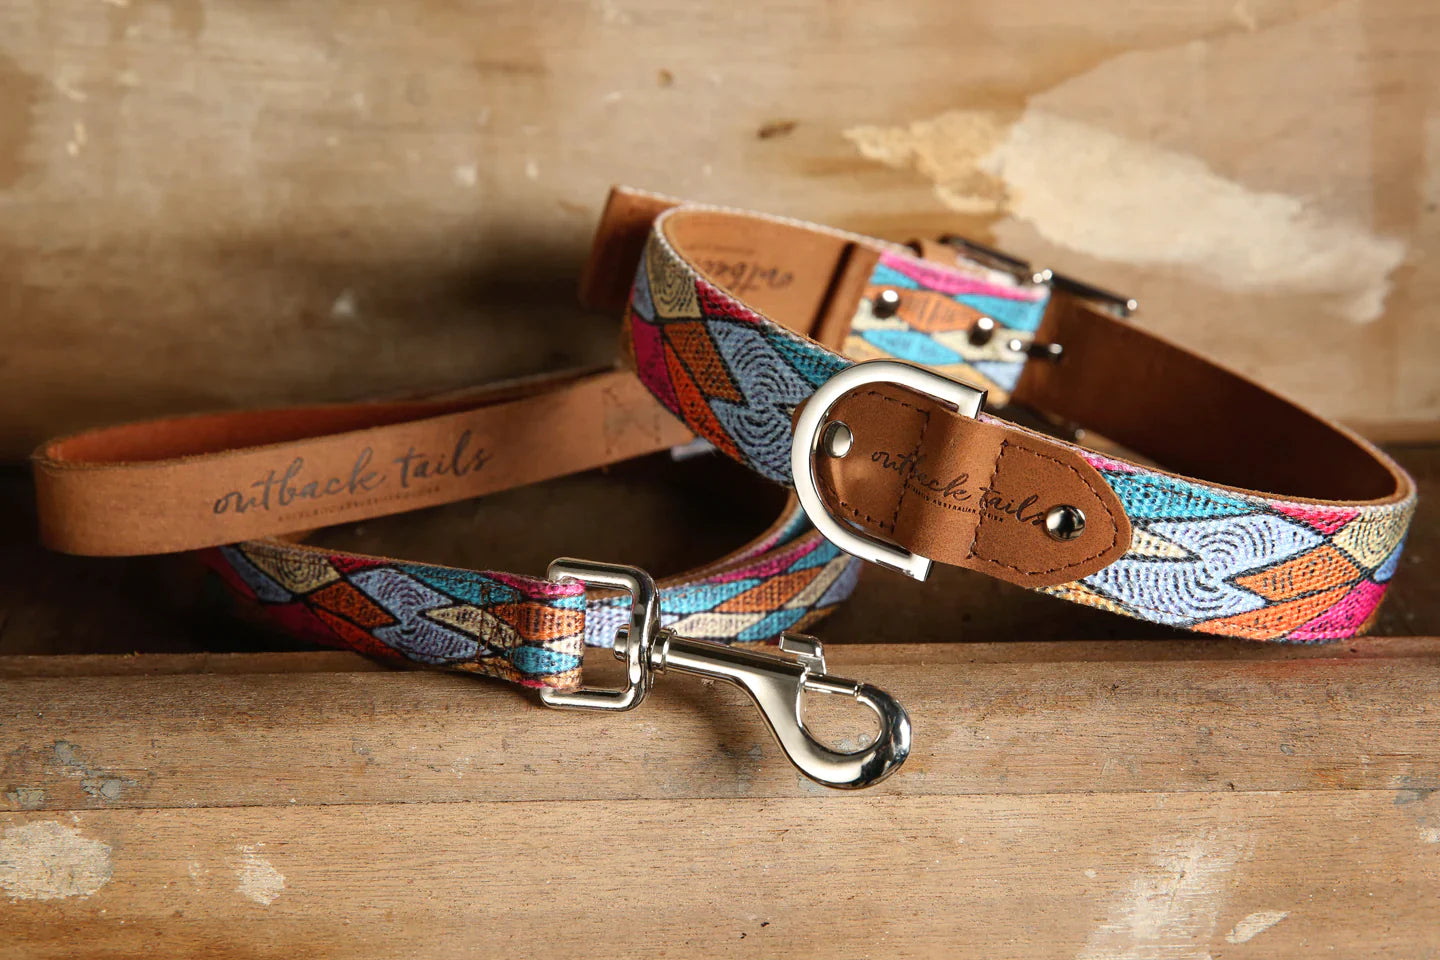 Outback Tails - Leather Dog Lead - Sand Dunes